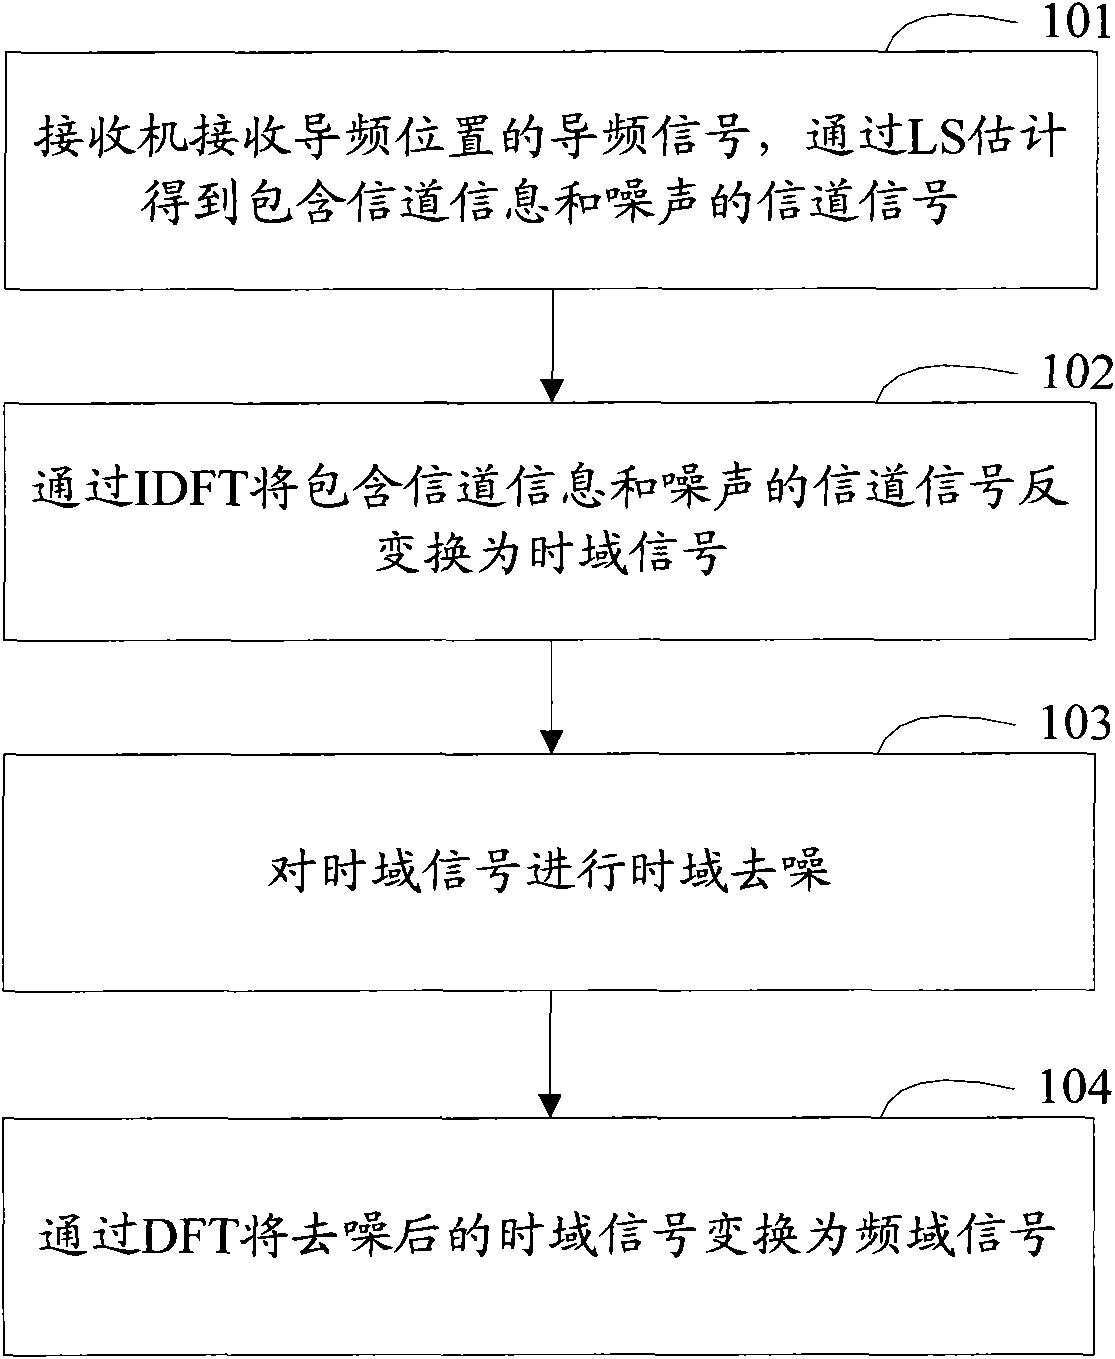 Channel estimation method of OFDM (orthogonal frequency division multiplexing) system